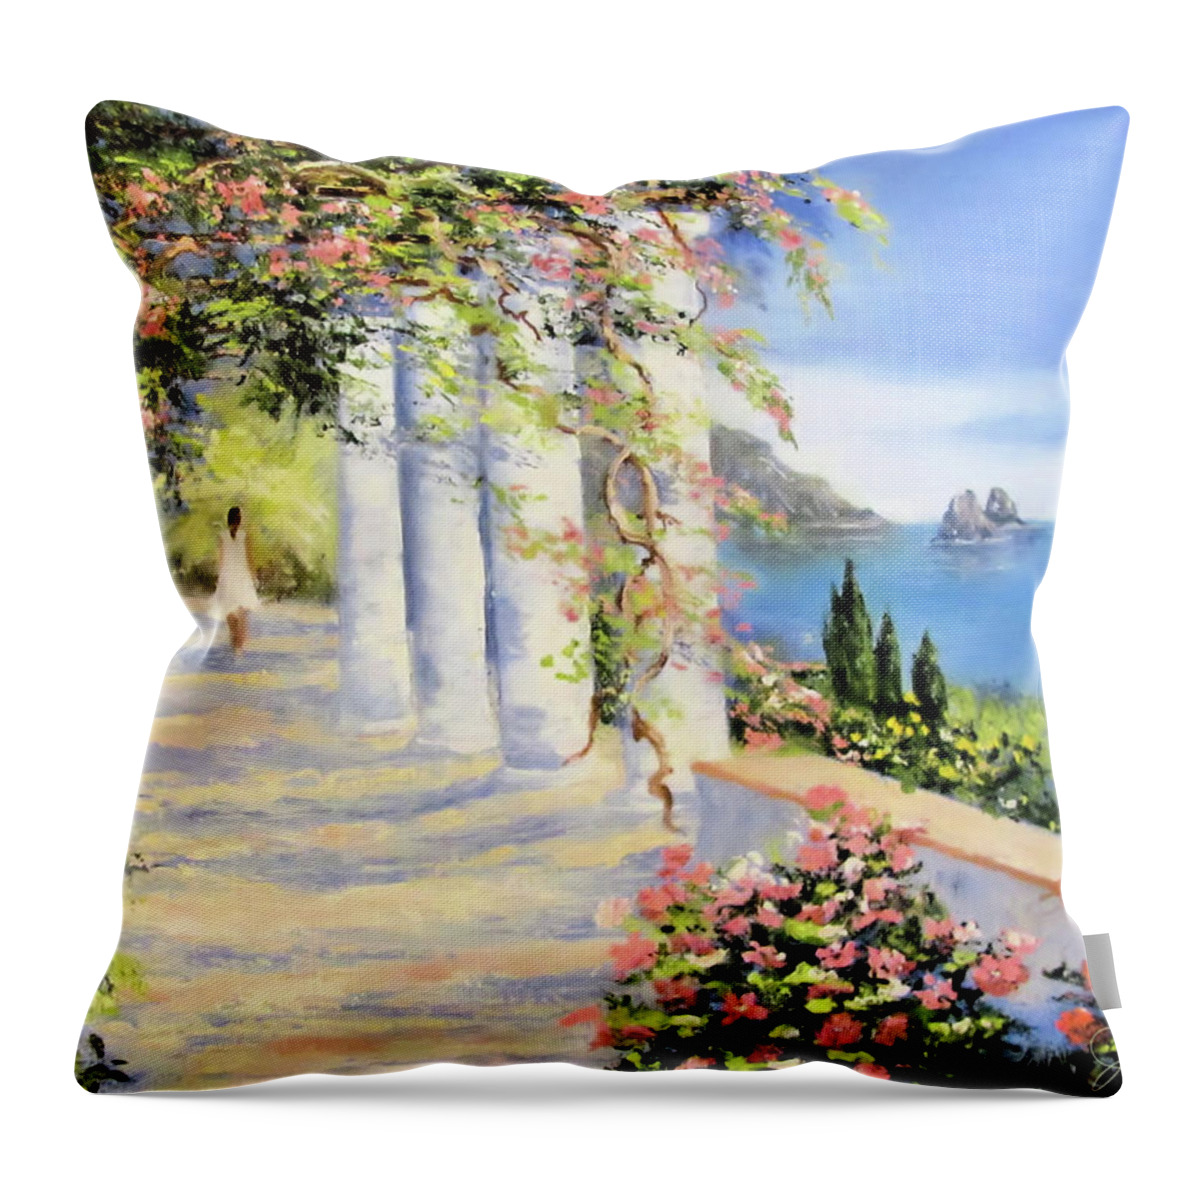 Flowers Throw Pillow featuring the painting Mediterranean Stroll by Joel Smith